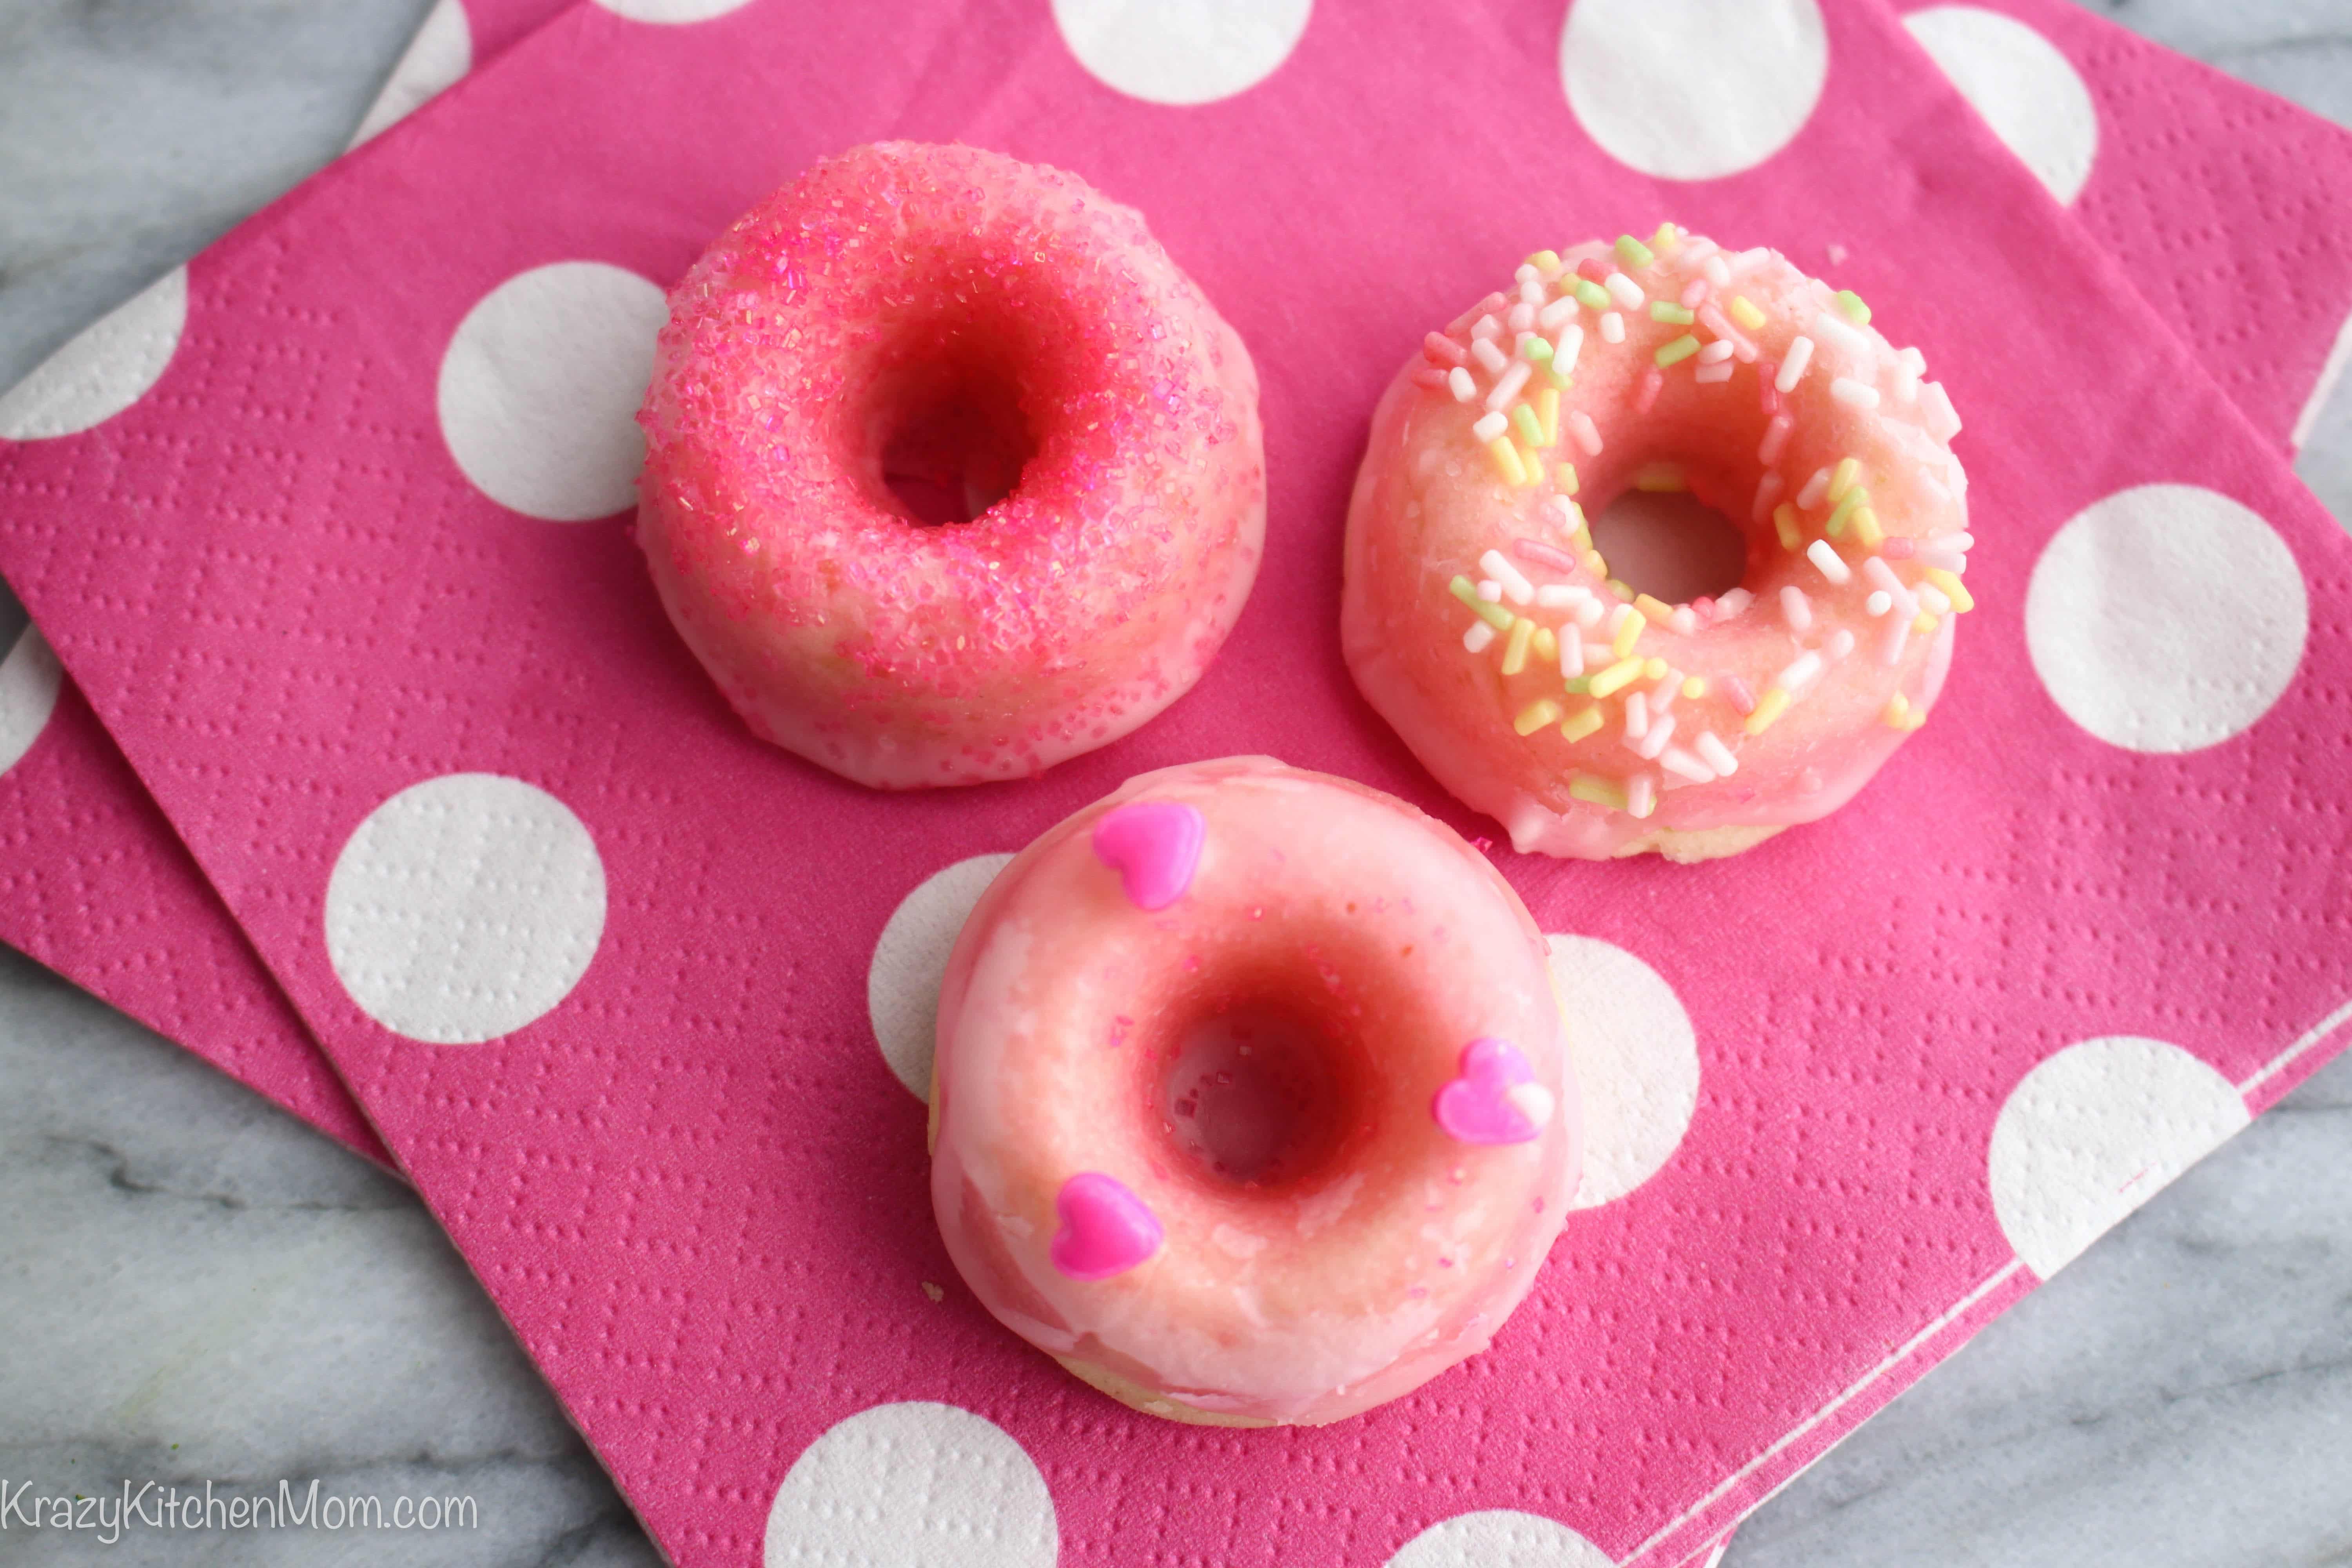 These Mini Pink Lemonade Donuts are baked and glazed with fresh lemon juice and confectioners sugar.